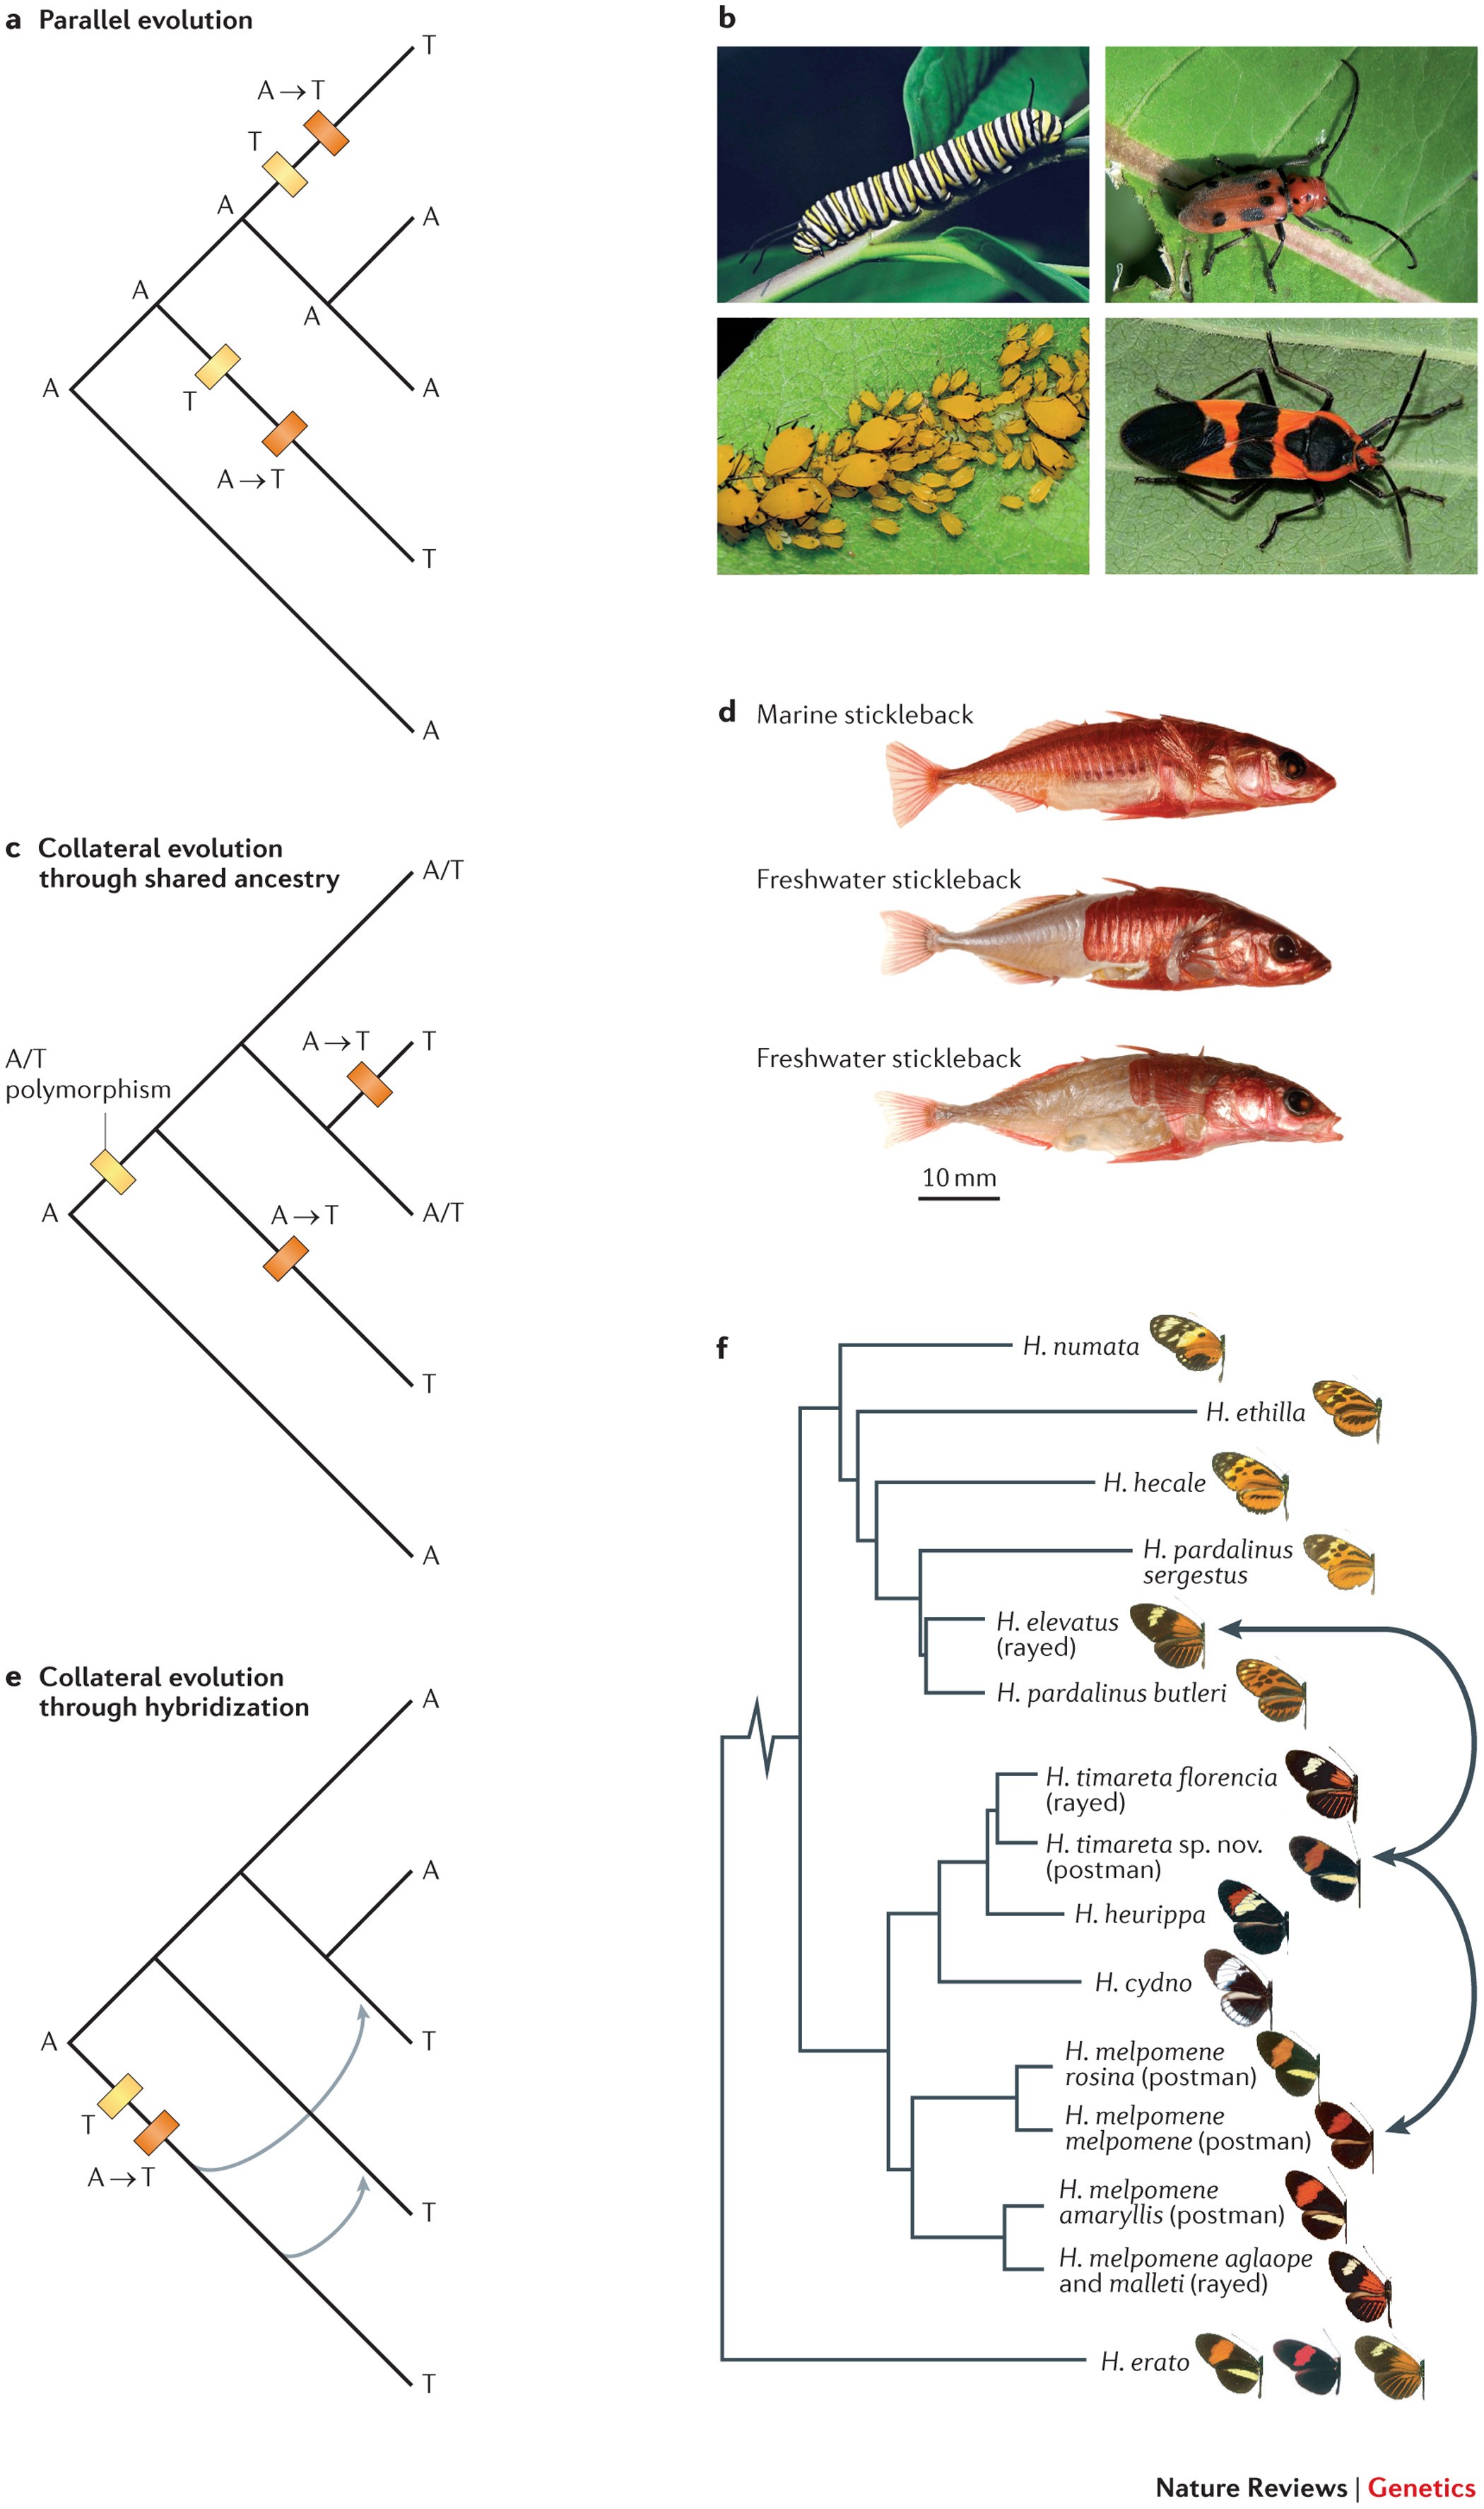 The genetic causes of convergent evolution | Nature Reviews Genetics